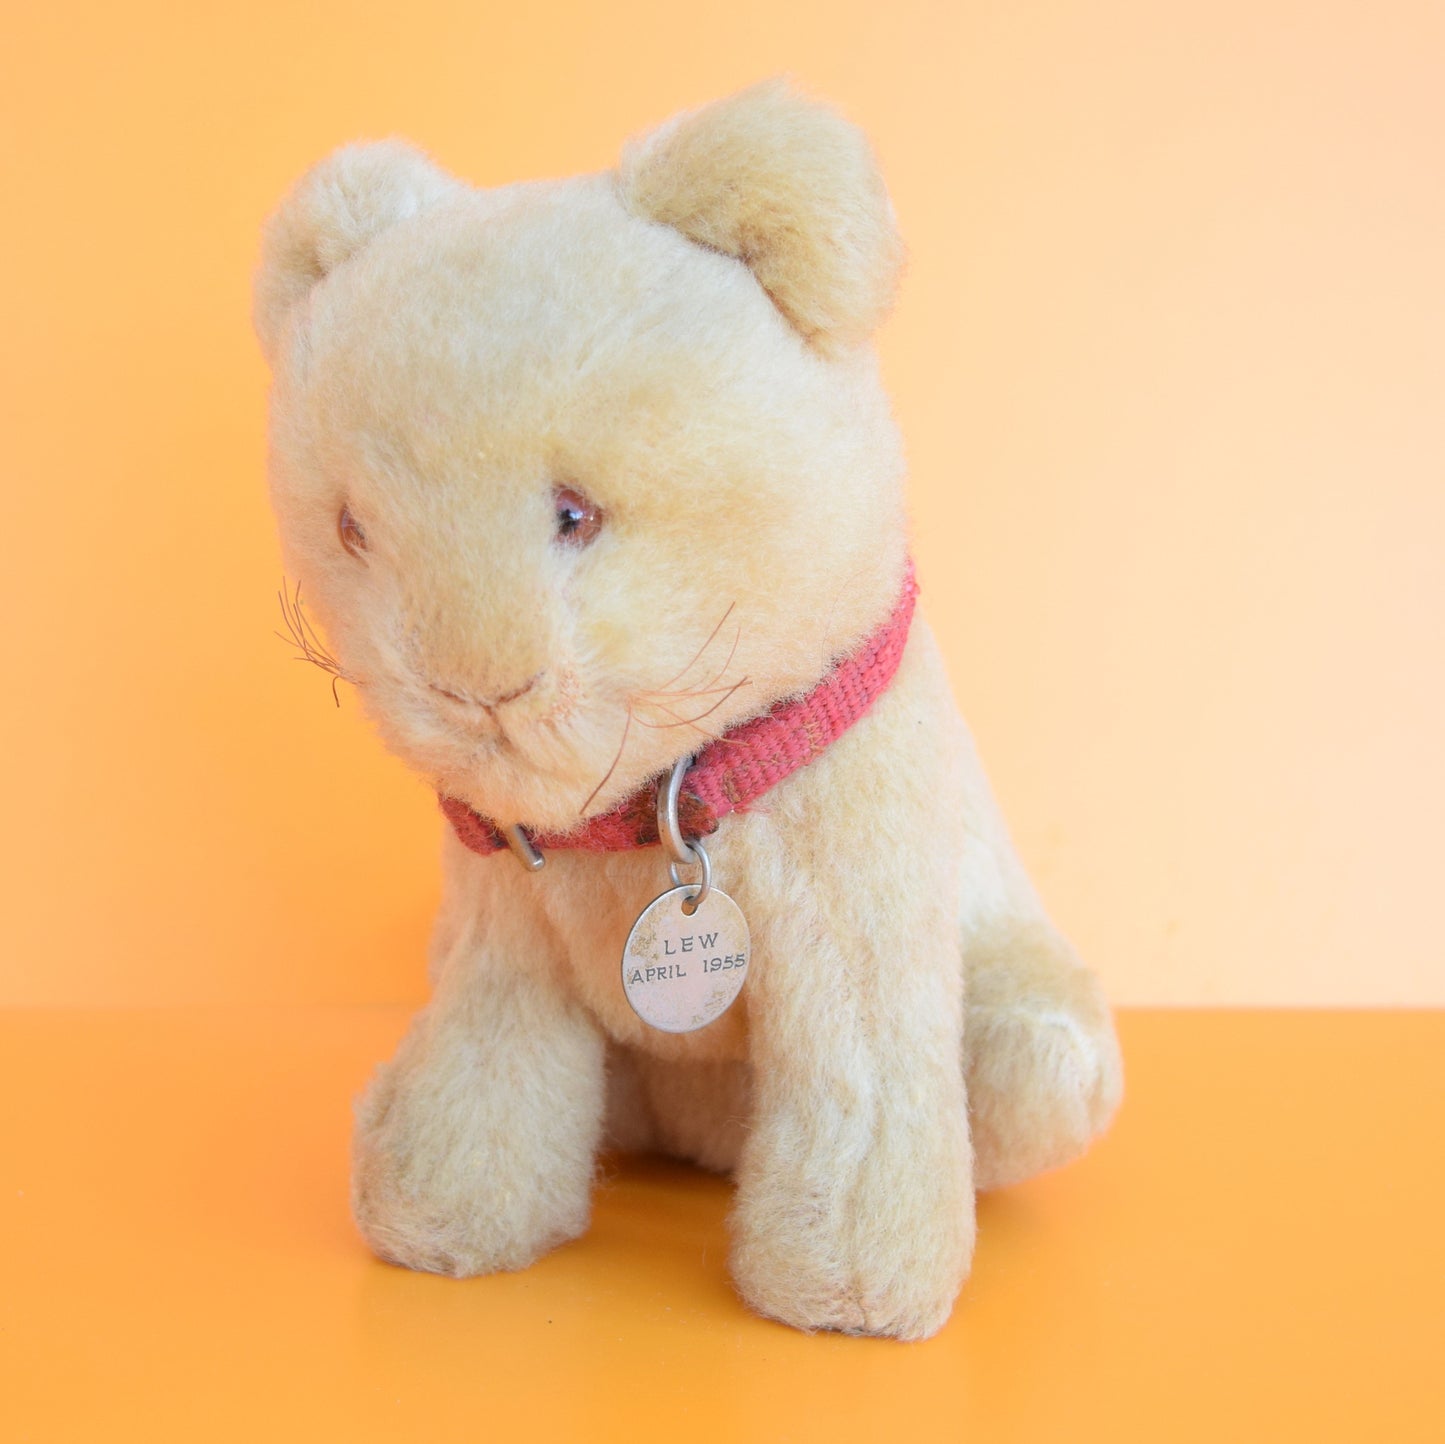 Vintage 1950s Cat Soft Toy - Mohair, Straw filled - LEW 1955